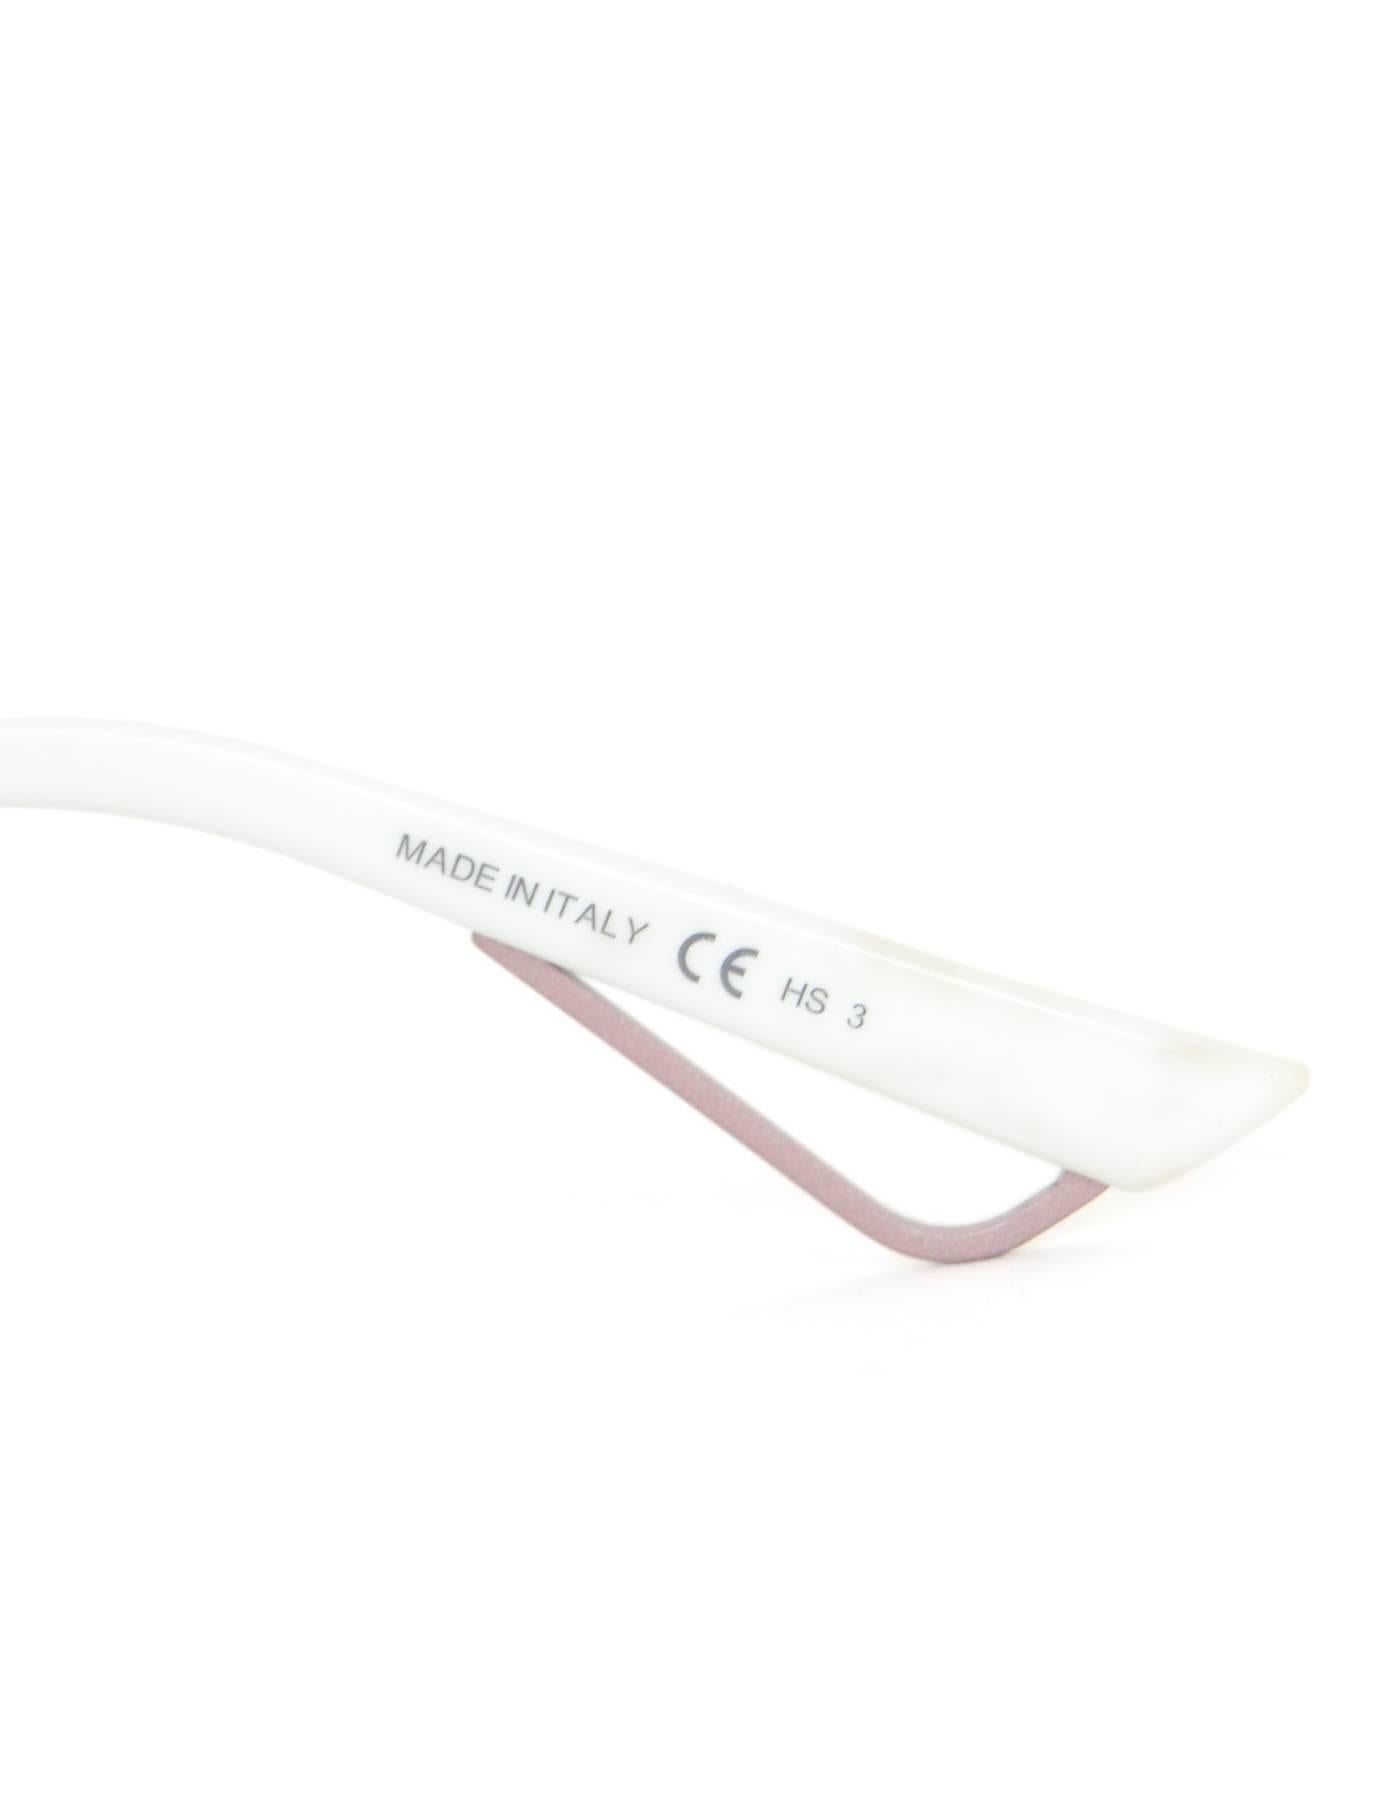 Women's Christian Dior White & Pink Mirrored Technologic Sunglasses with Case